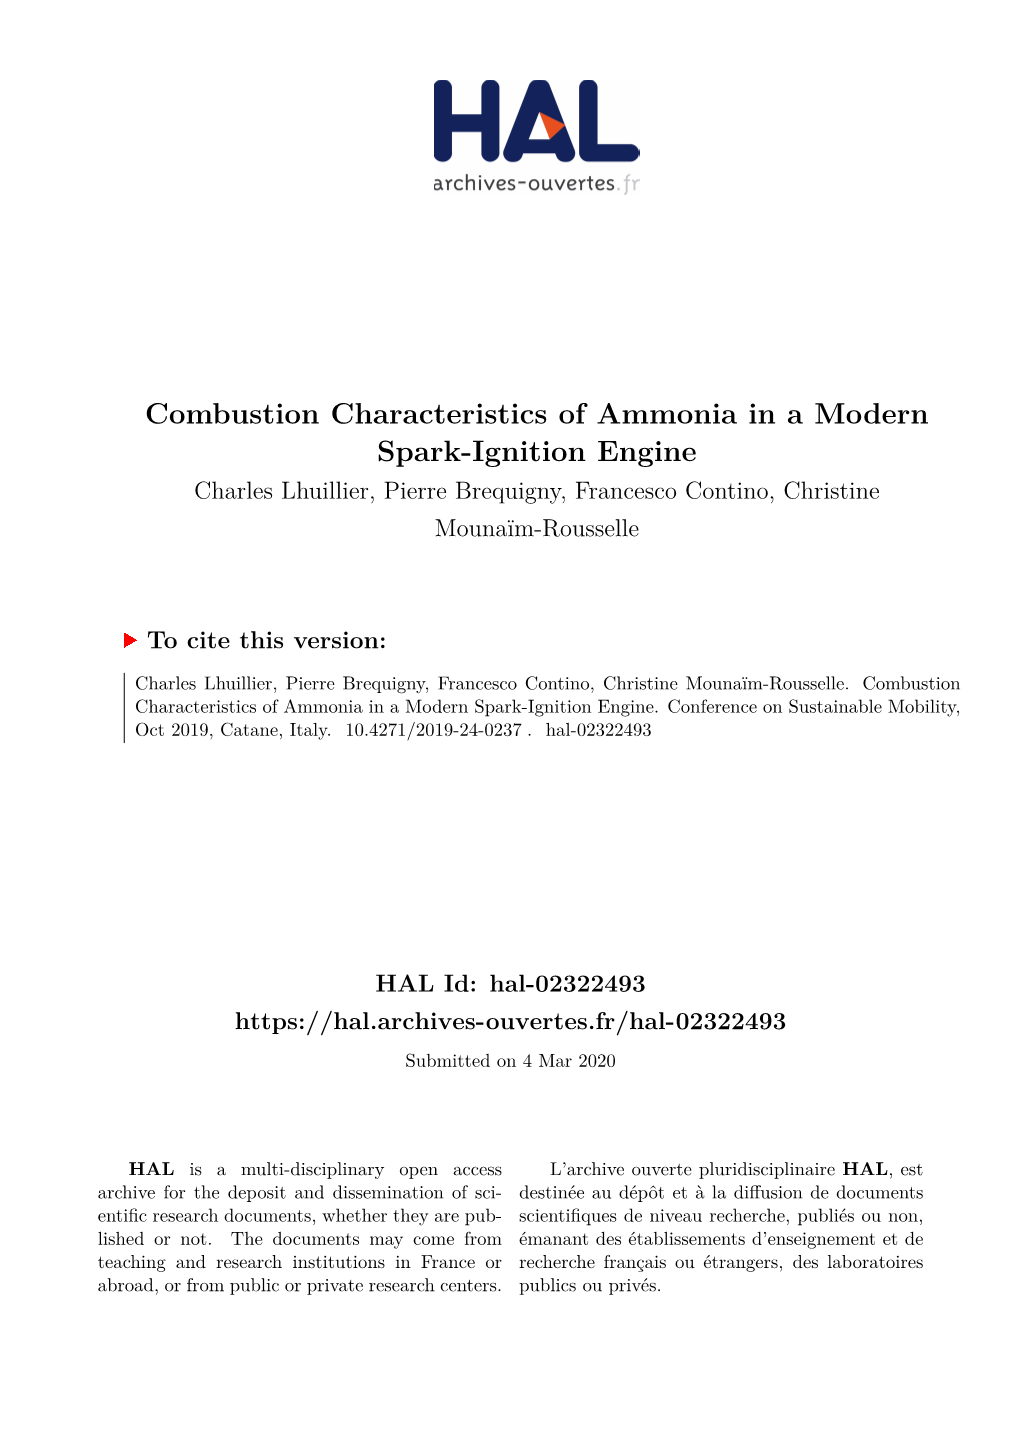 Combustion Characteristics of Ammonia in a Modern Spark-Ignition Engine Charles Lhuillier, Pierre Brequigny, Francesco Contino, Christine Mounaïm-Rousselle